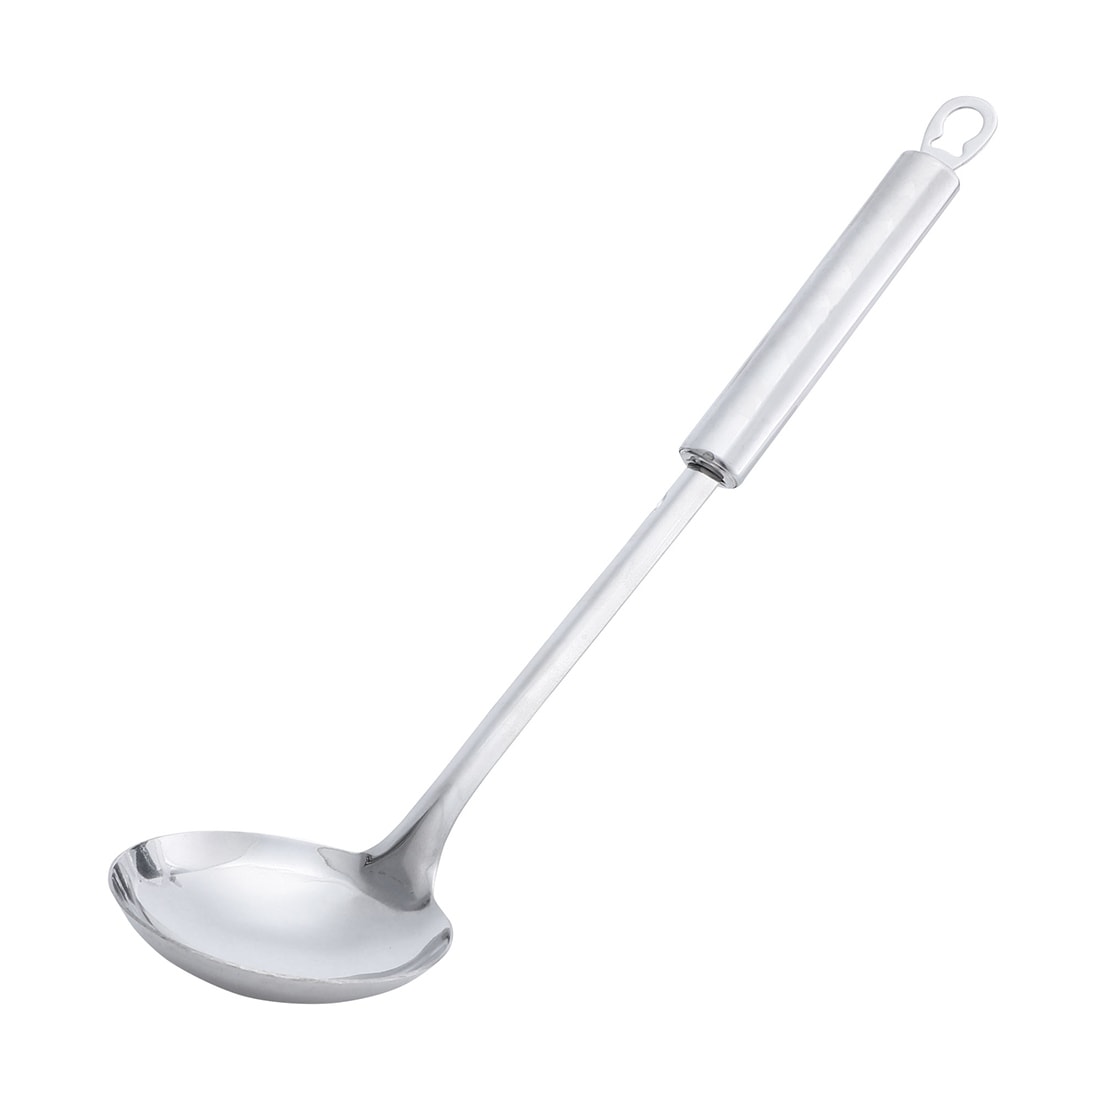 https://ak1.ostkcdn.com/images/products/is/images/direct/5dcd9bb226d42aa17448d5745e4c1e1691f42b81/Stainless-Steel-Long-Handle-Soup-Ladle-Chef-Cooking-11%22-Length.jpg